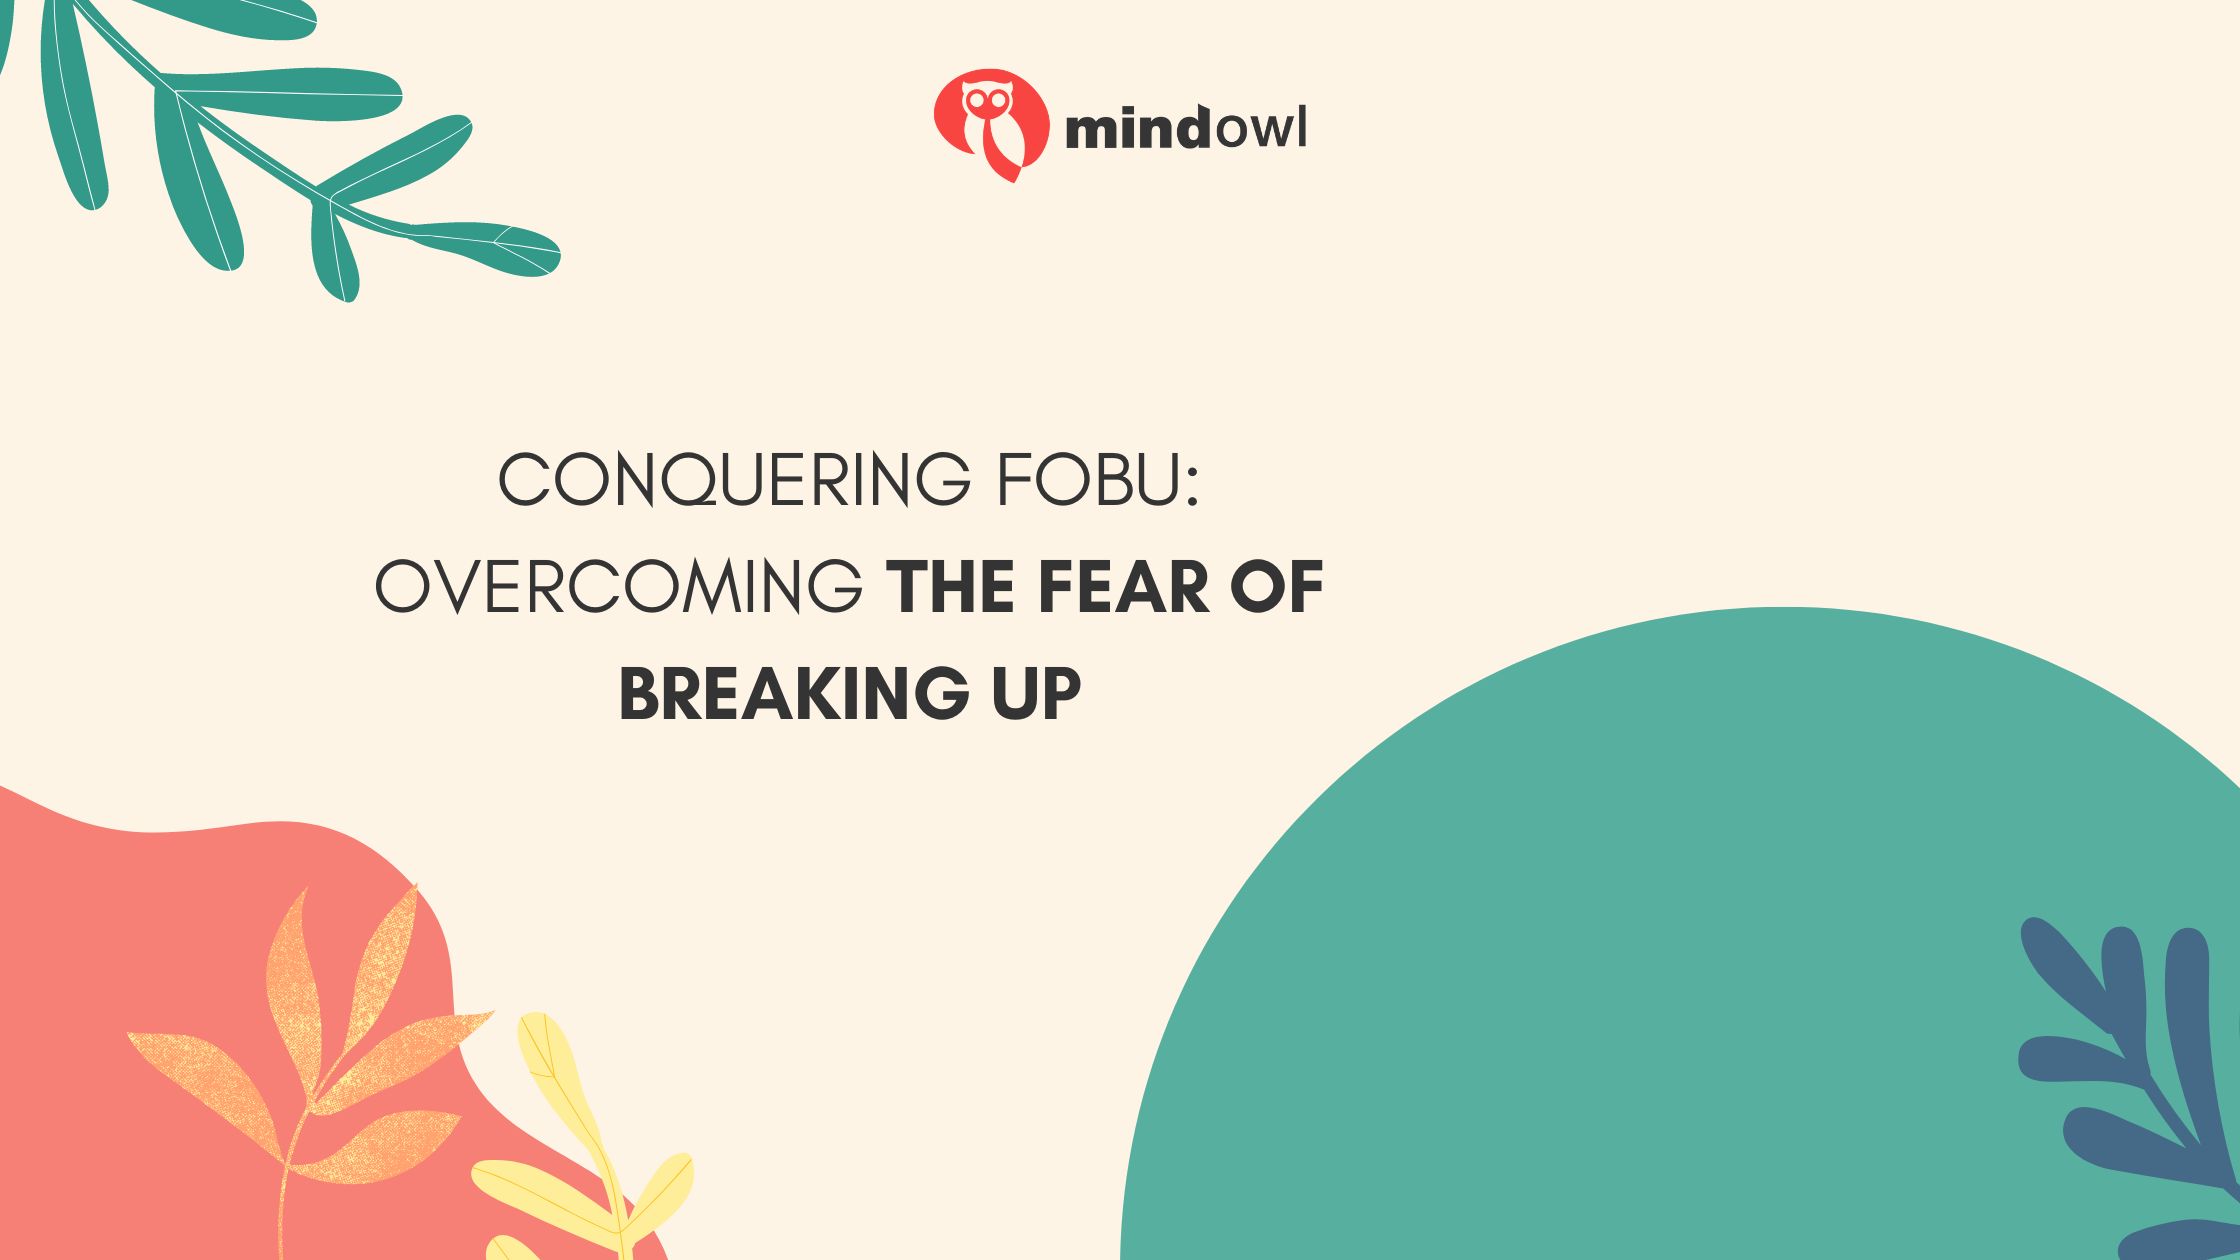 Conquering FOBU: Overcoming the Fear of Breaking Up